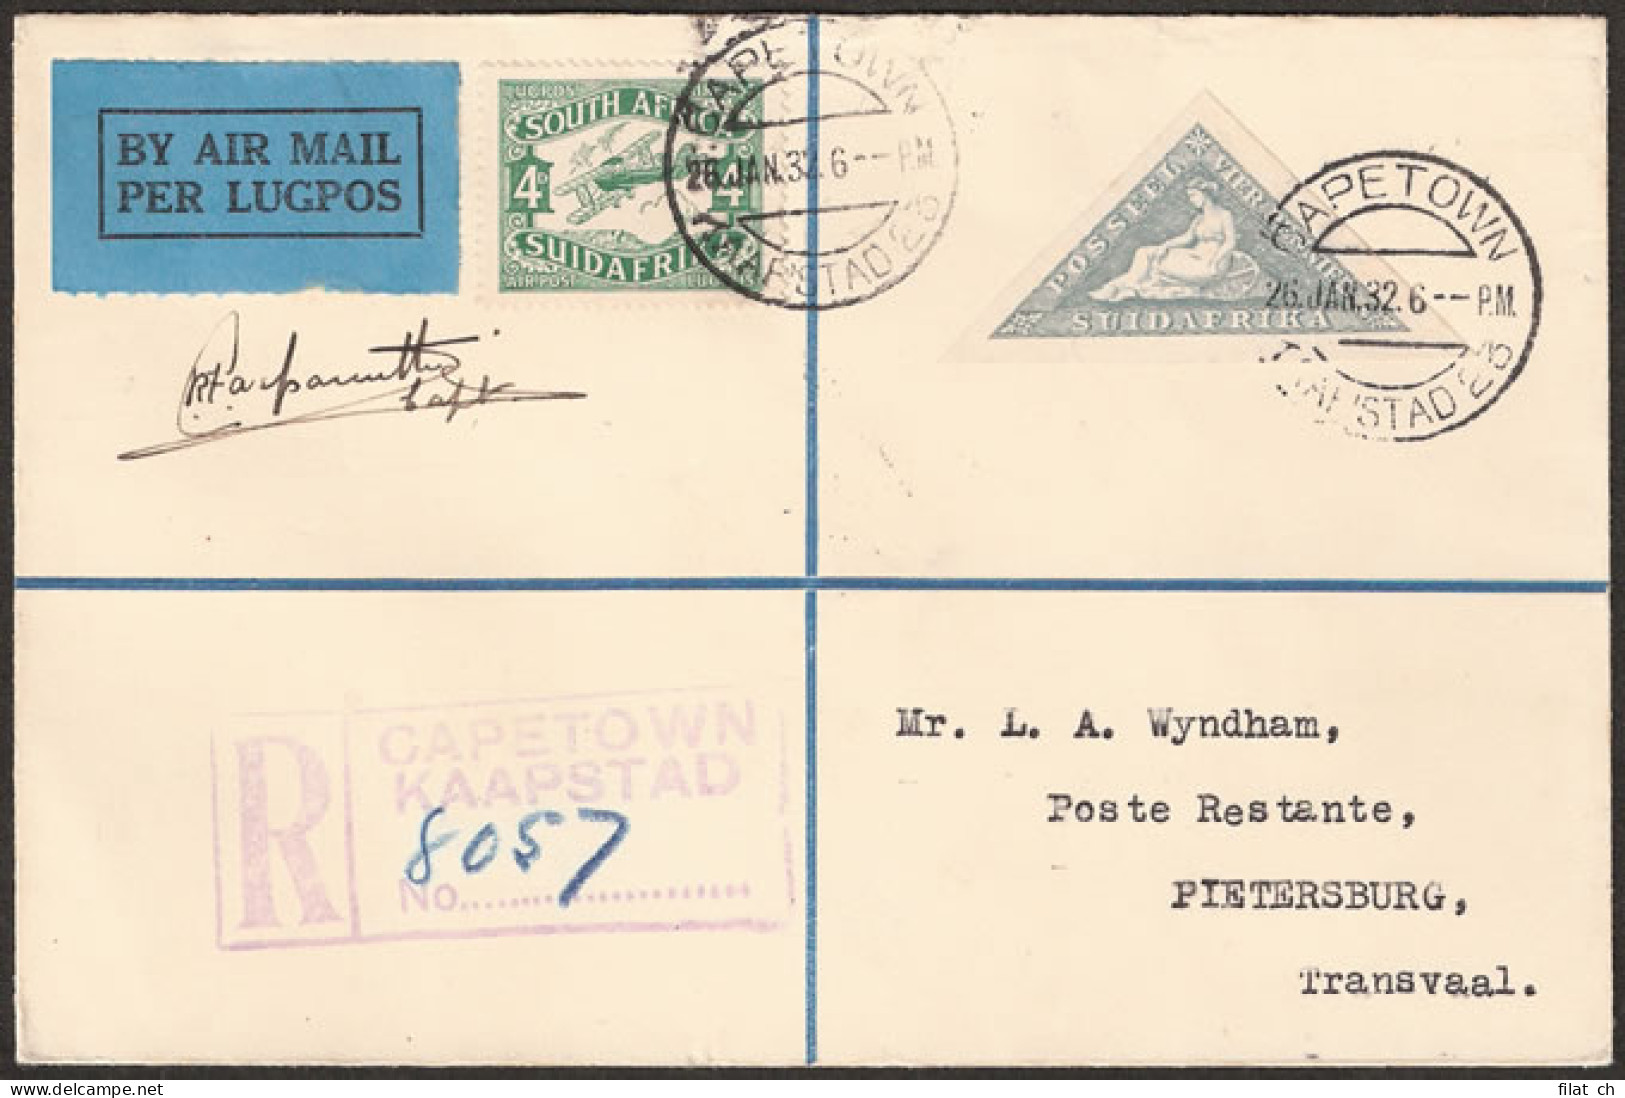 South Africa 1932 Cape Town To Pietersburg, Pilot Signed - Airmail